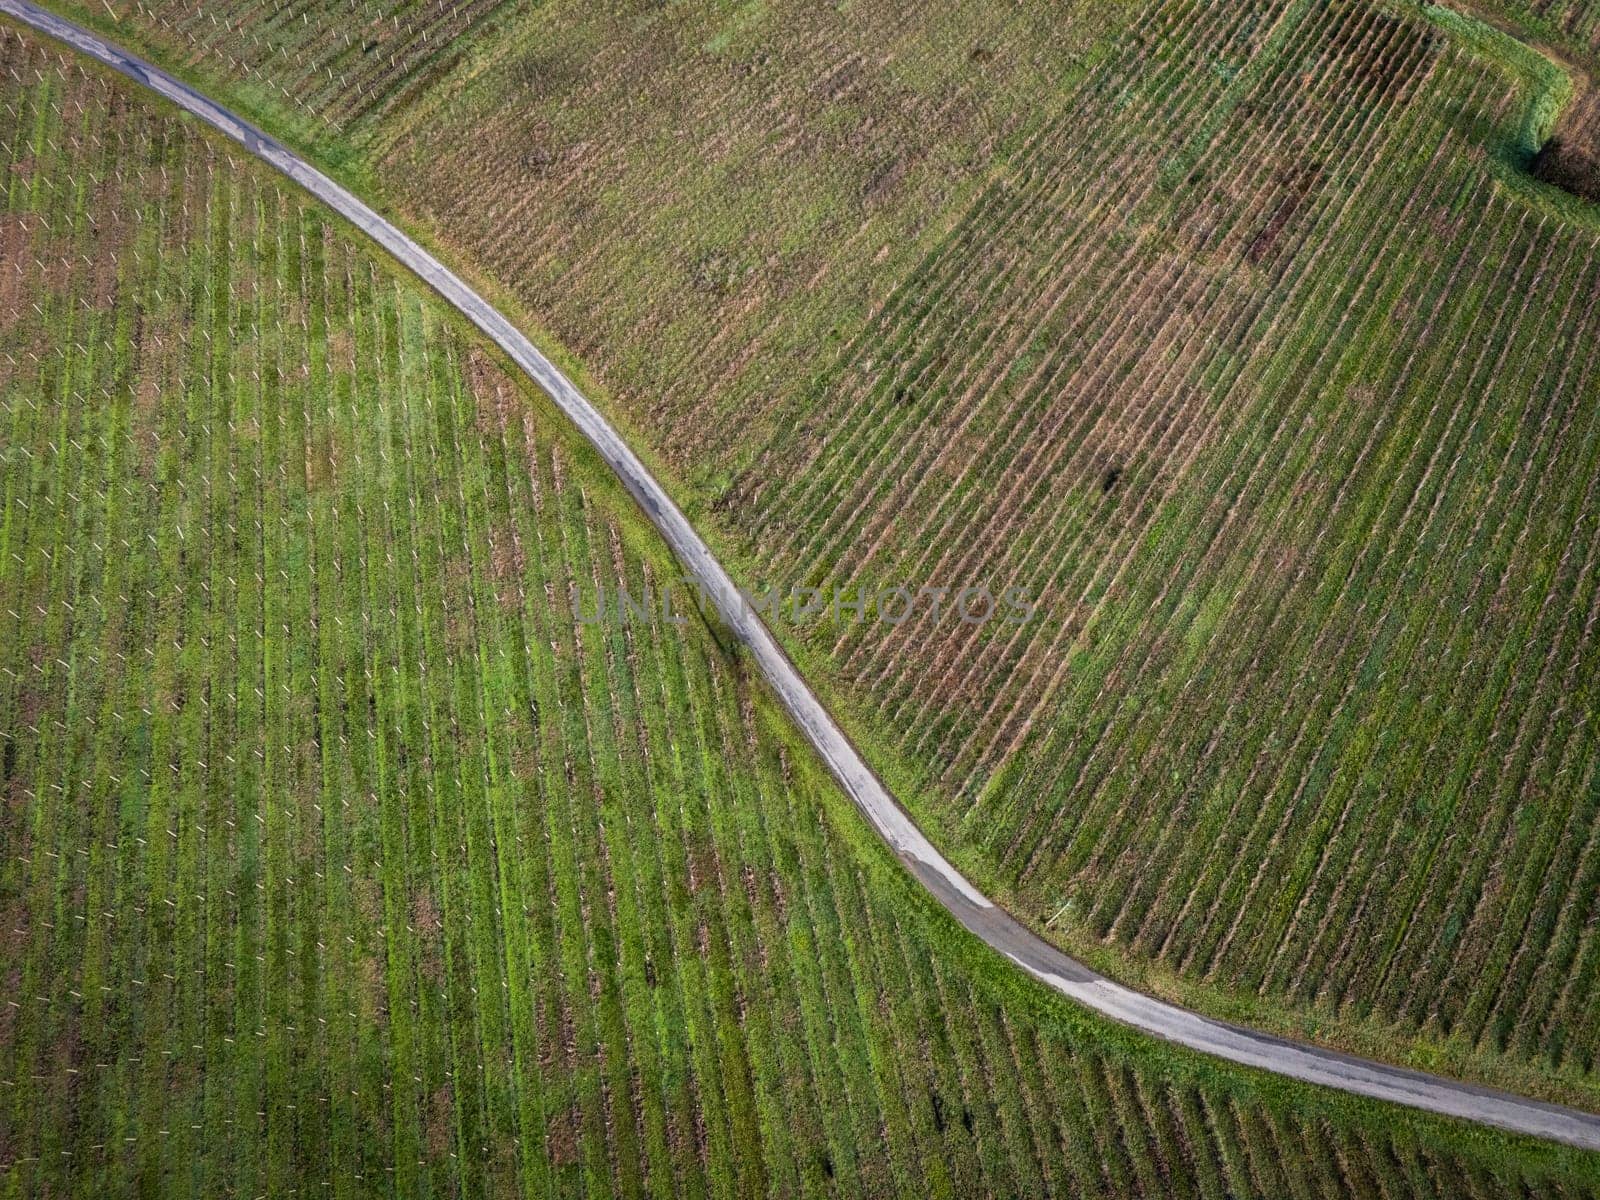 FRANCE, GIRONDE, SAINTE CROIX DU MONT, WINDING COUNTRY ROAD THROUGH THE BORDEAUX VINEYARDS IN WINTER, VINEYARDS IN WINTER, AOC CADILLAC COTES DE BORDEAUX, BORDEAUX VINEYARD, AERIAL VIEW